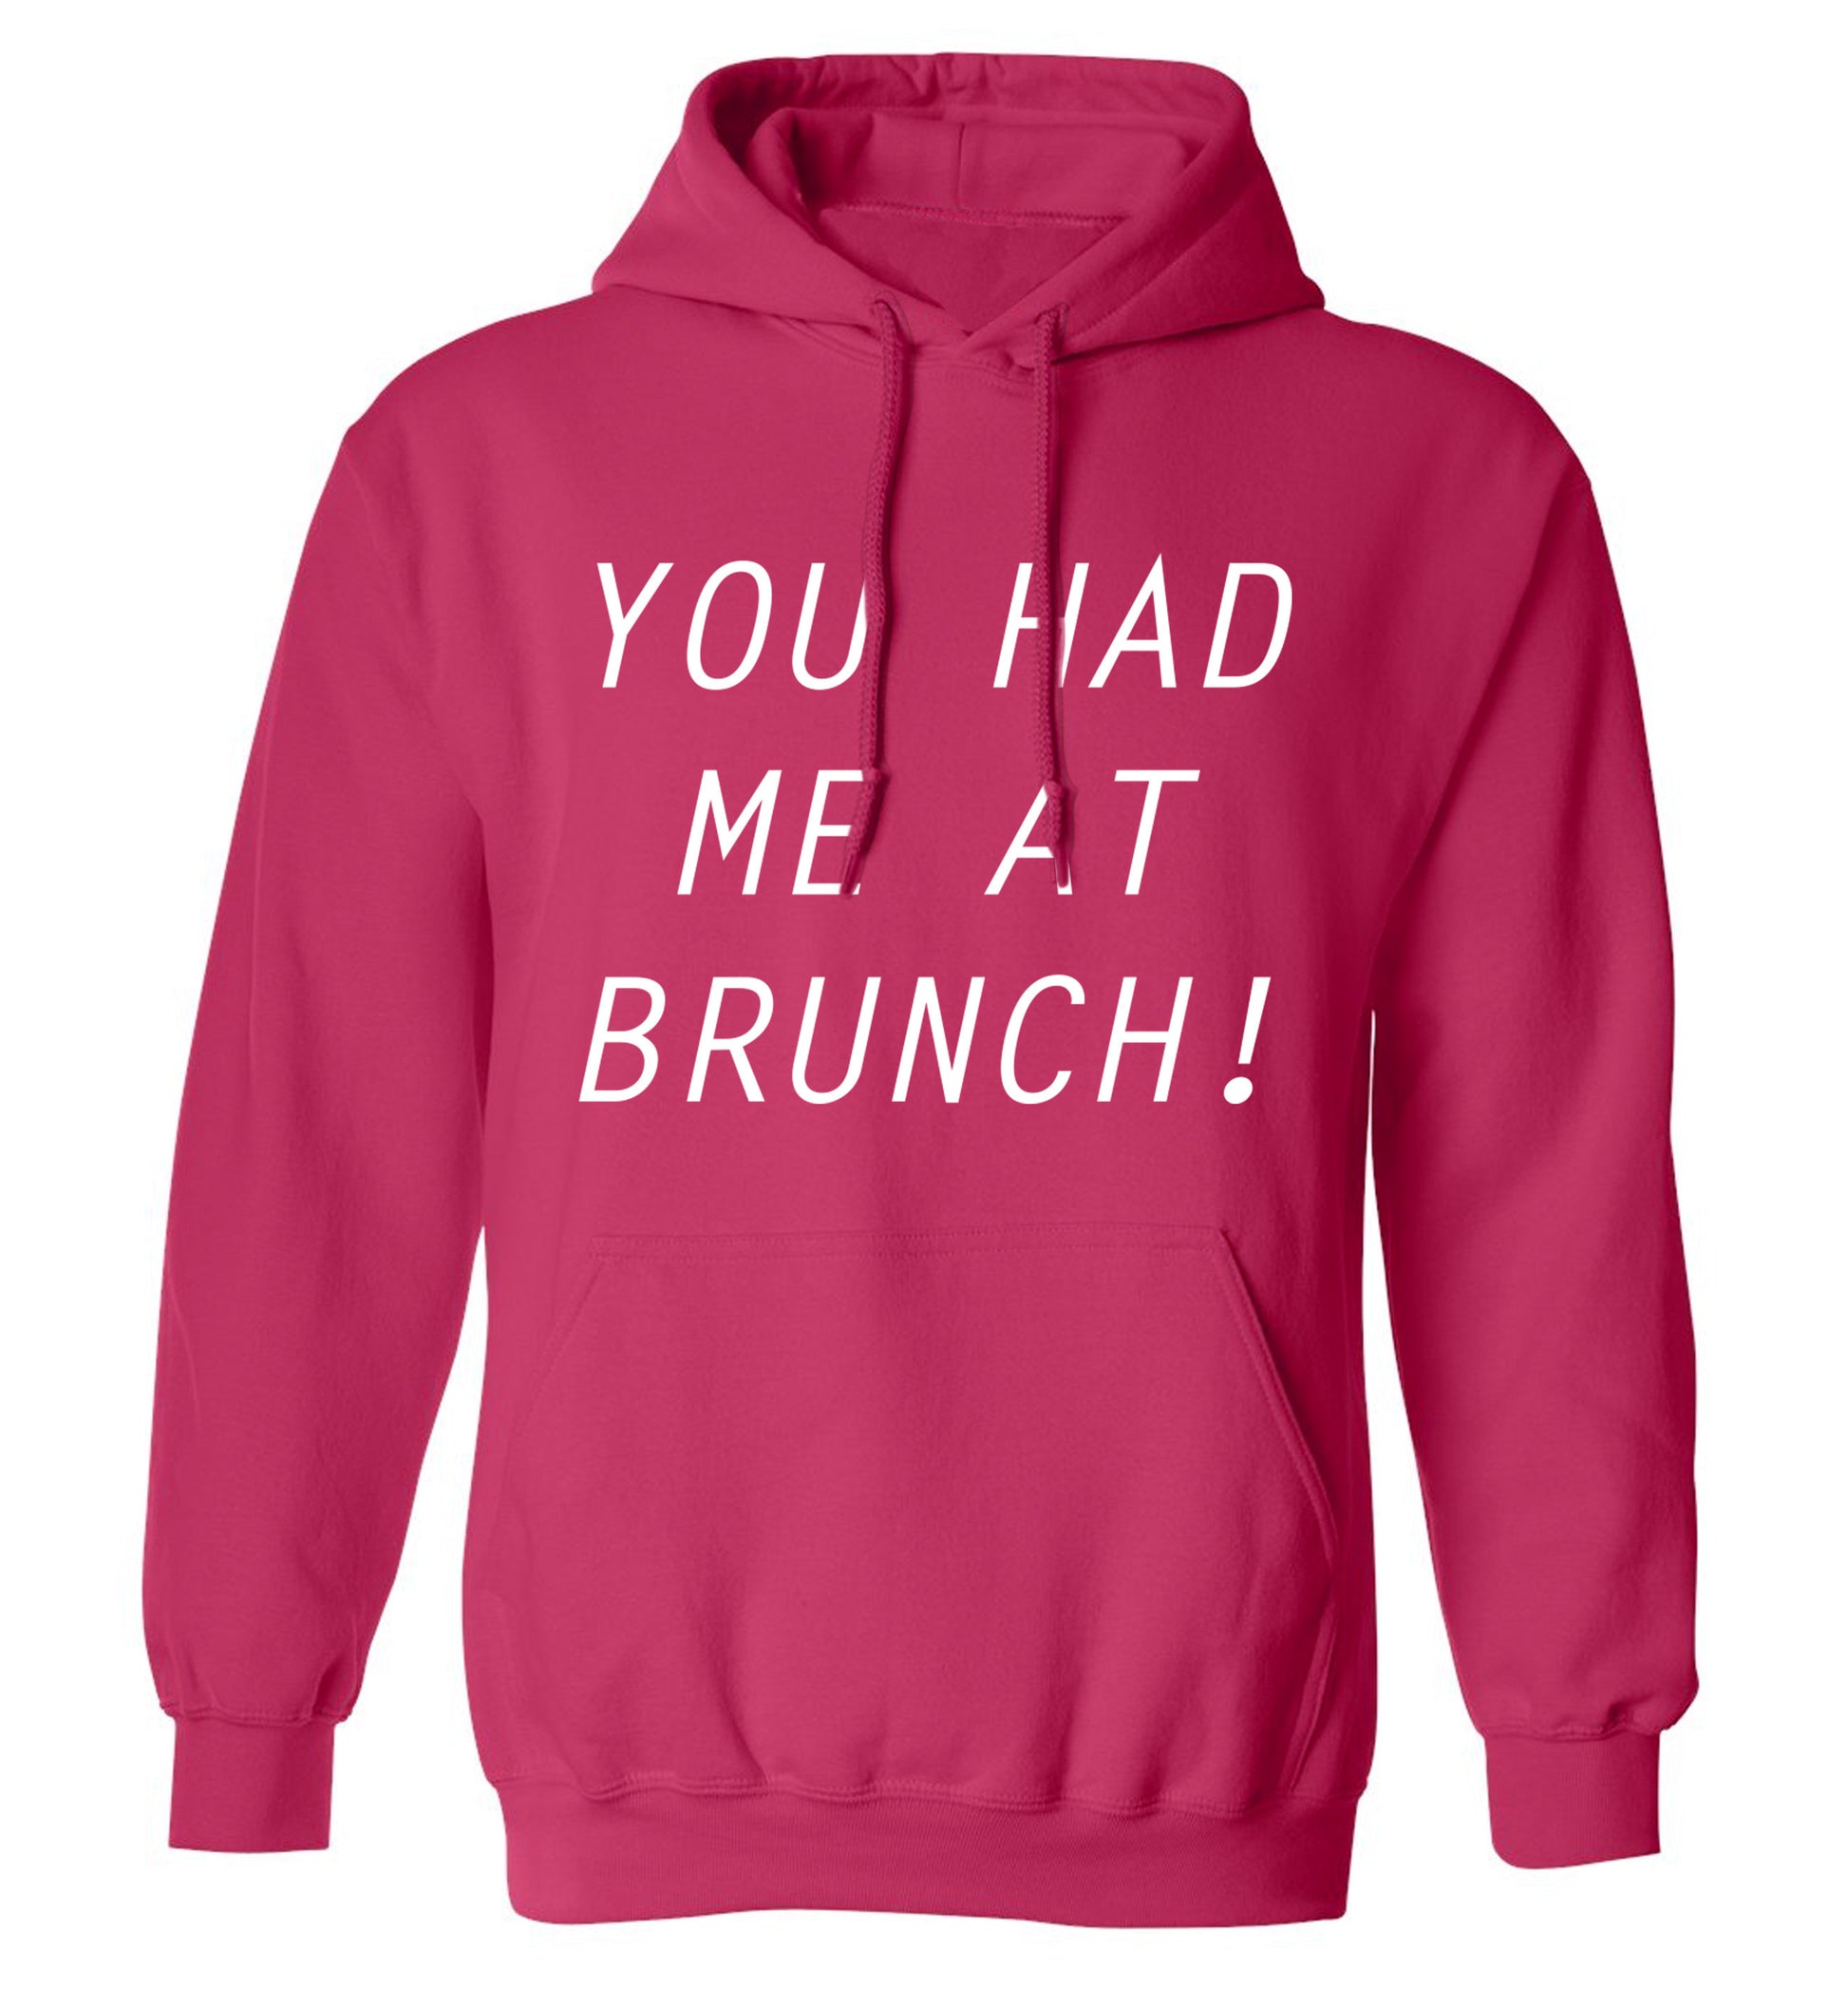 You had me at brunch adults unisex pink hoodie 2XL